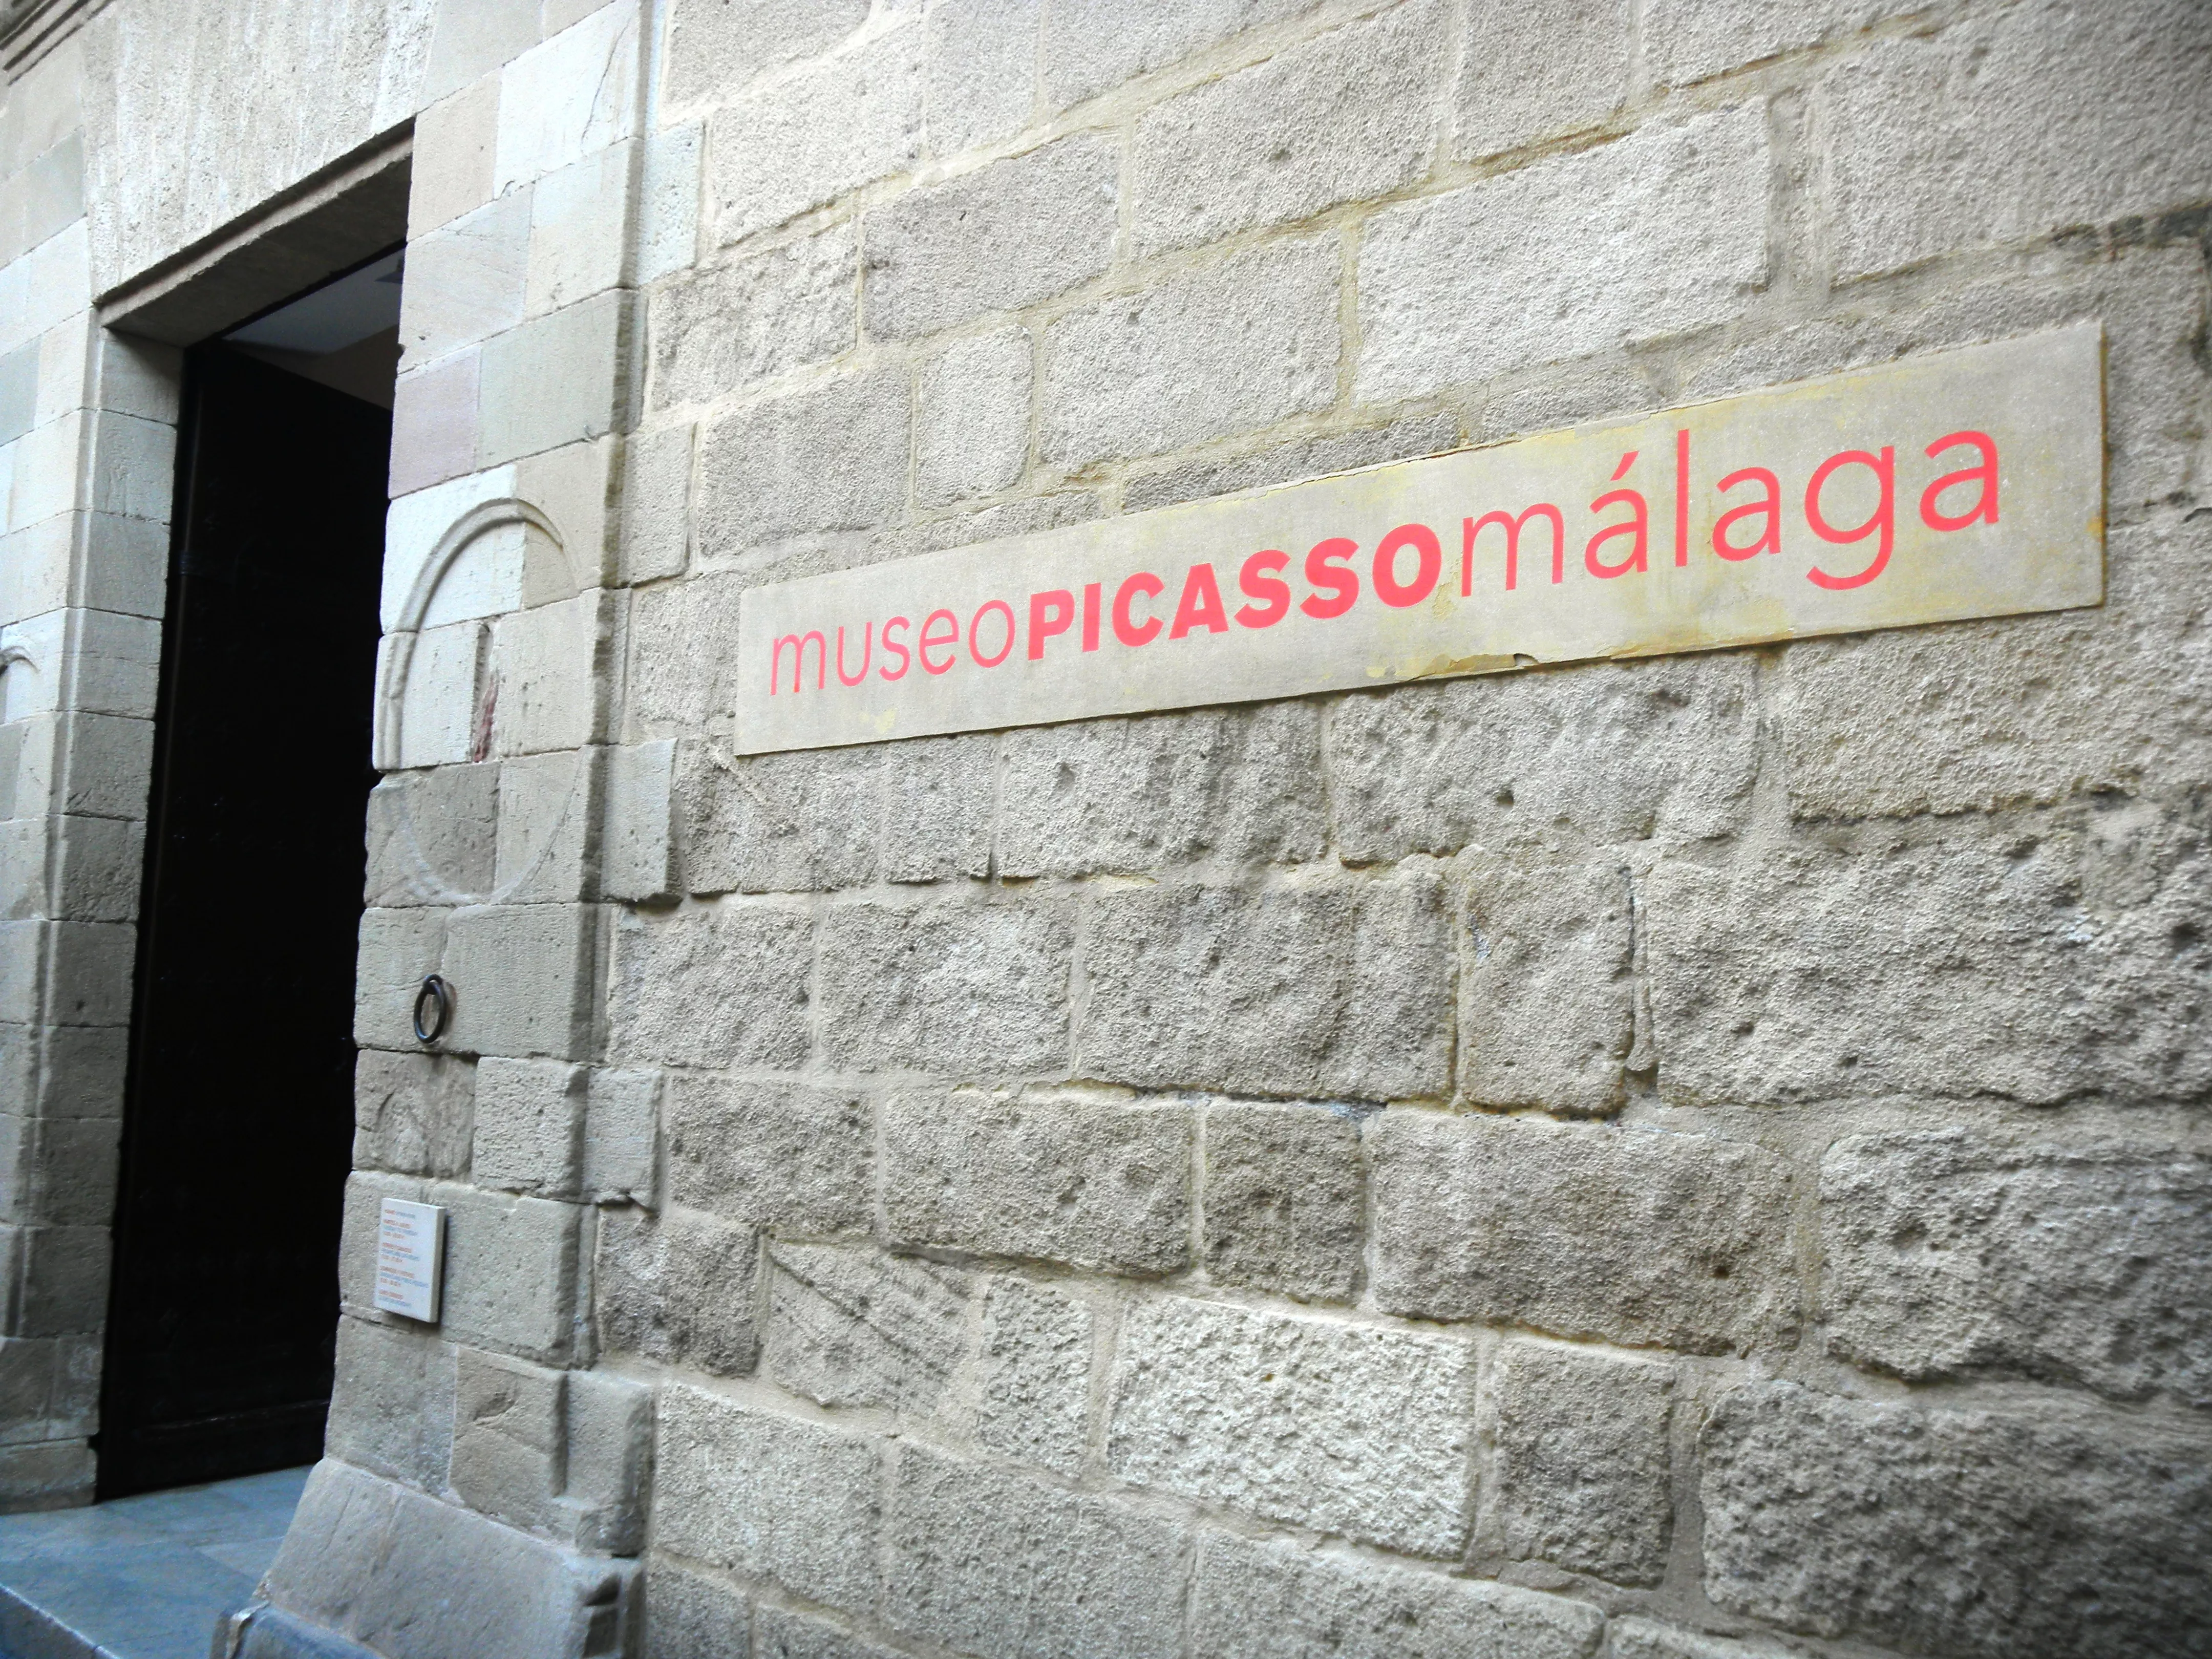 Picasso Museum in Malaga in Spain, Europe | Museums - Rated 3.8